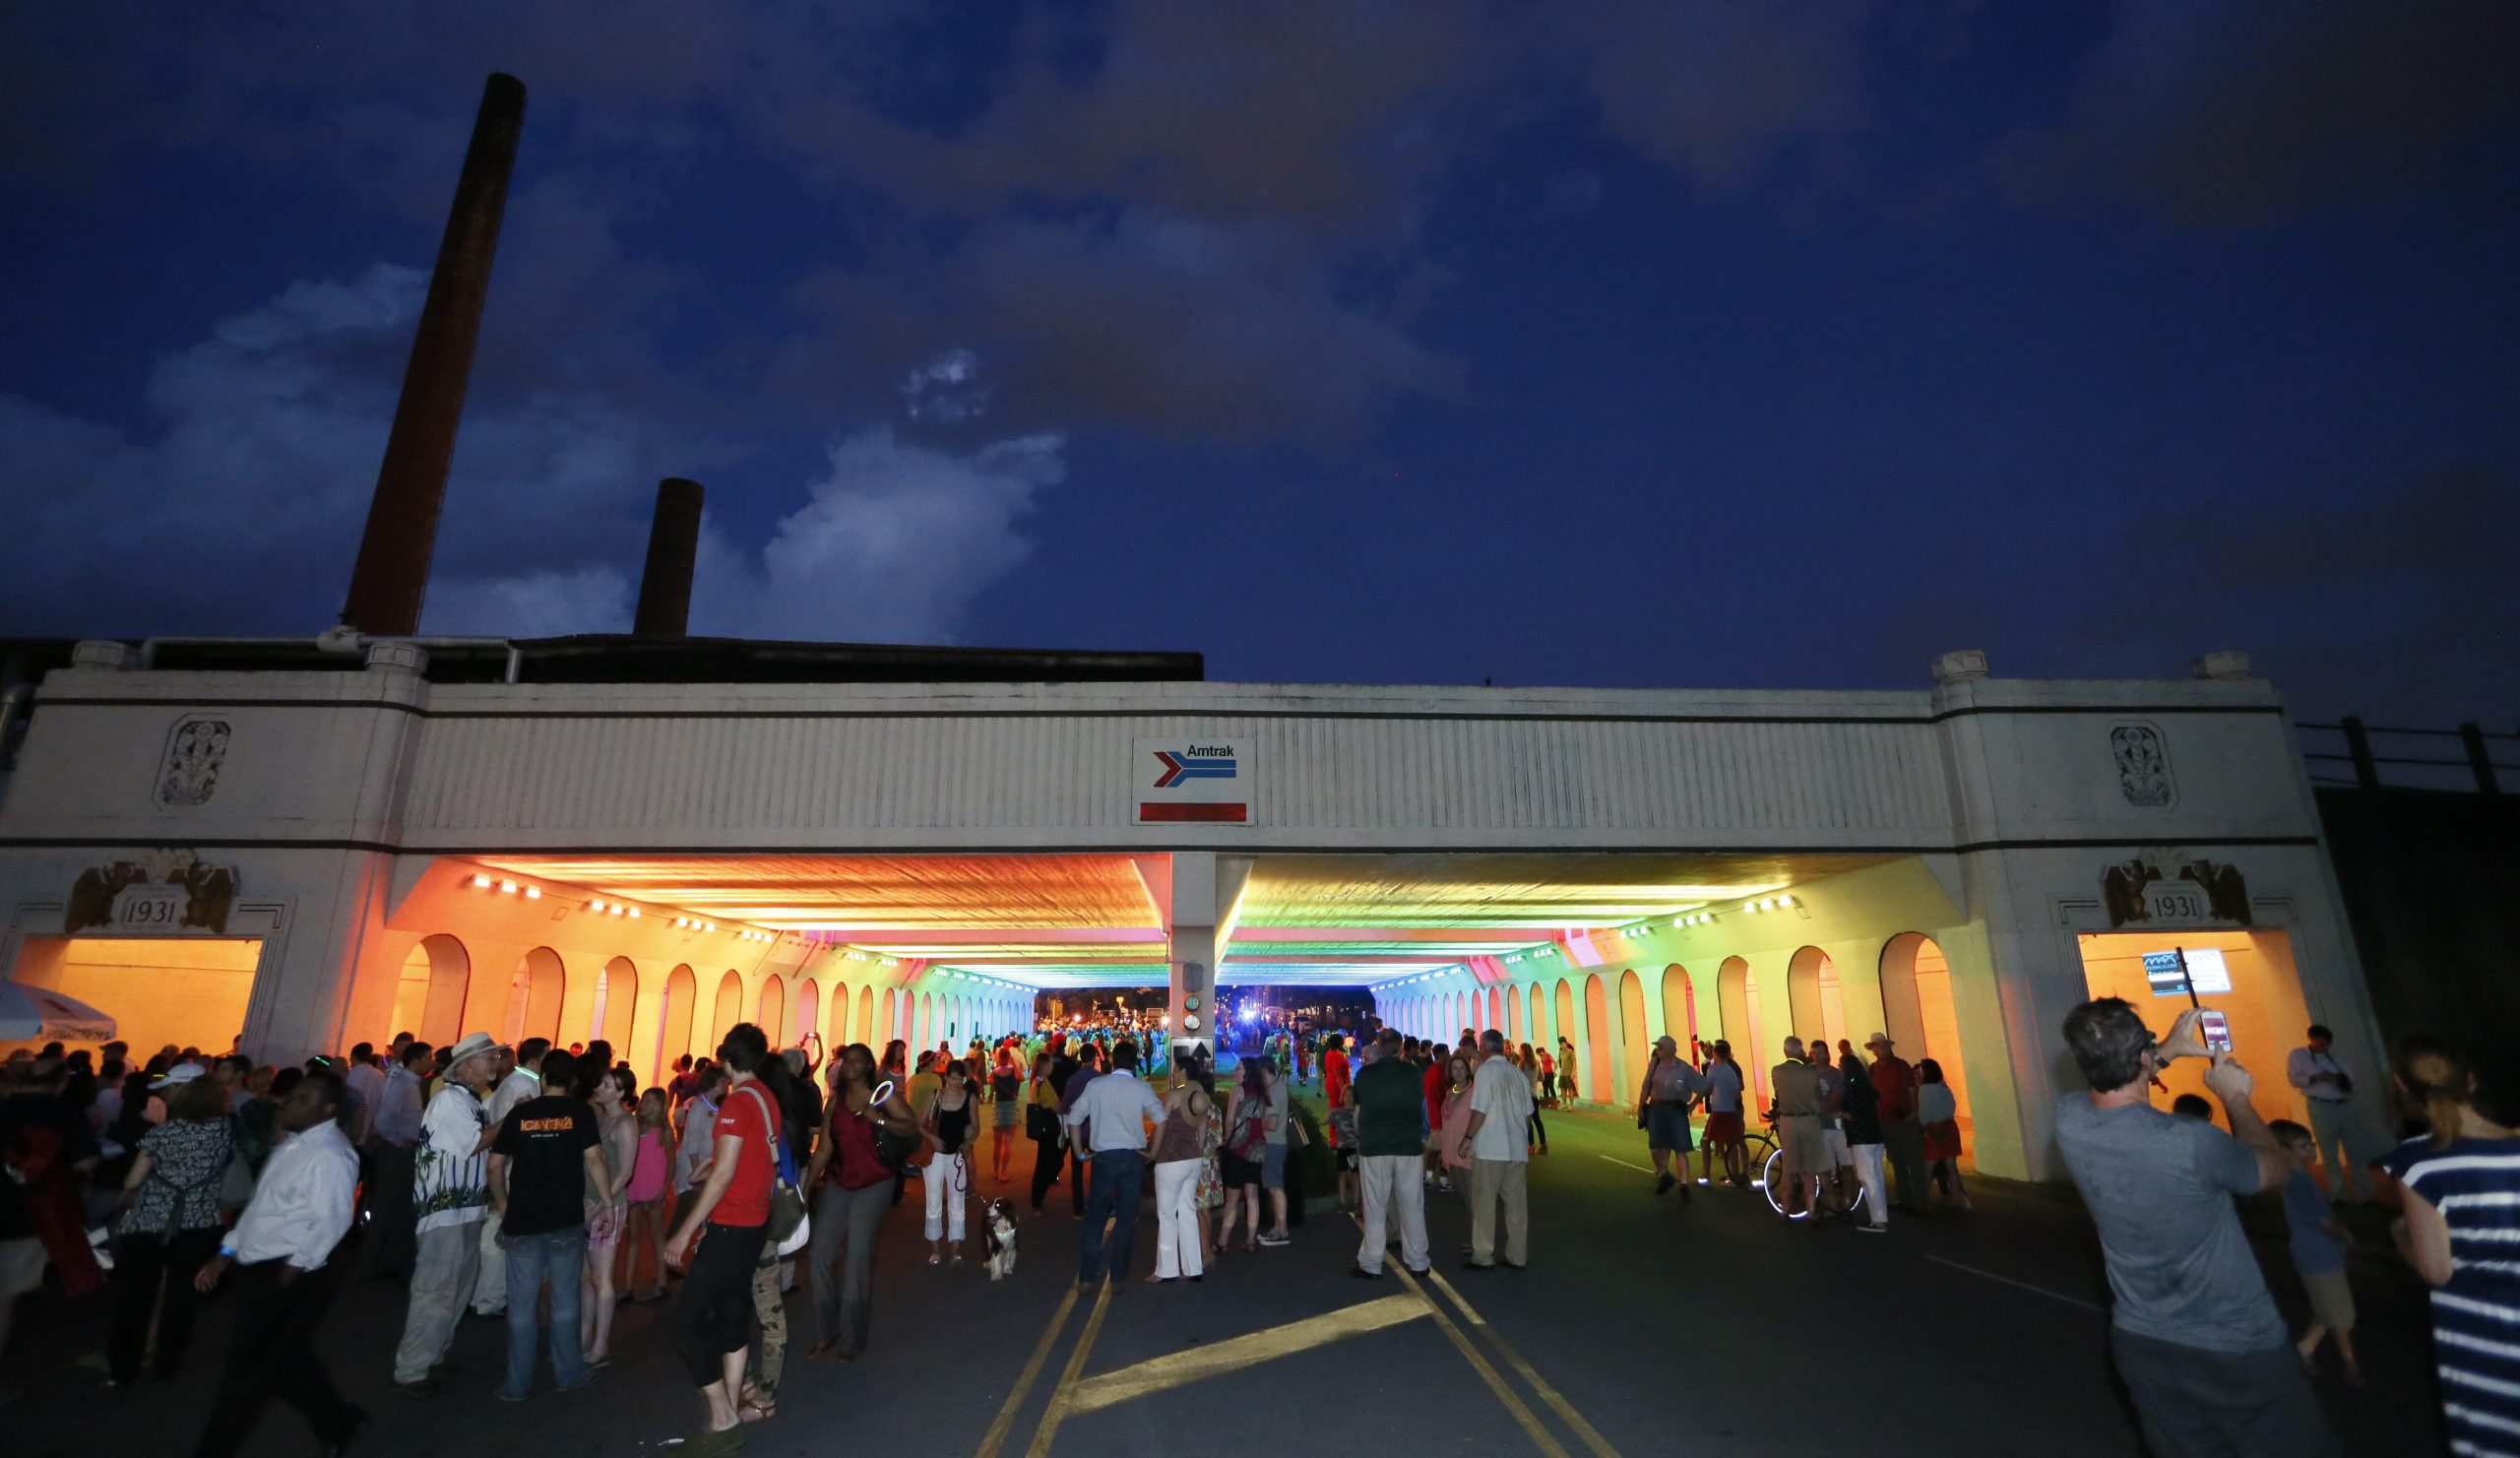 The 18th street underpass was lit with colorful lights with help from the Community Foundation Birmingham Thursday June 27,  2013 in Birmingham, Ala. (Photo/Hal Yeager)